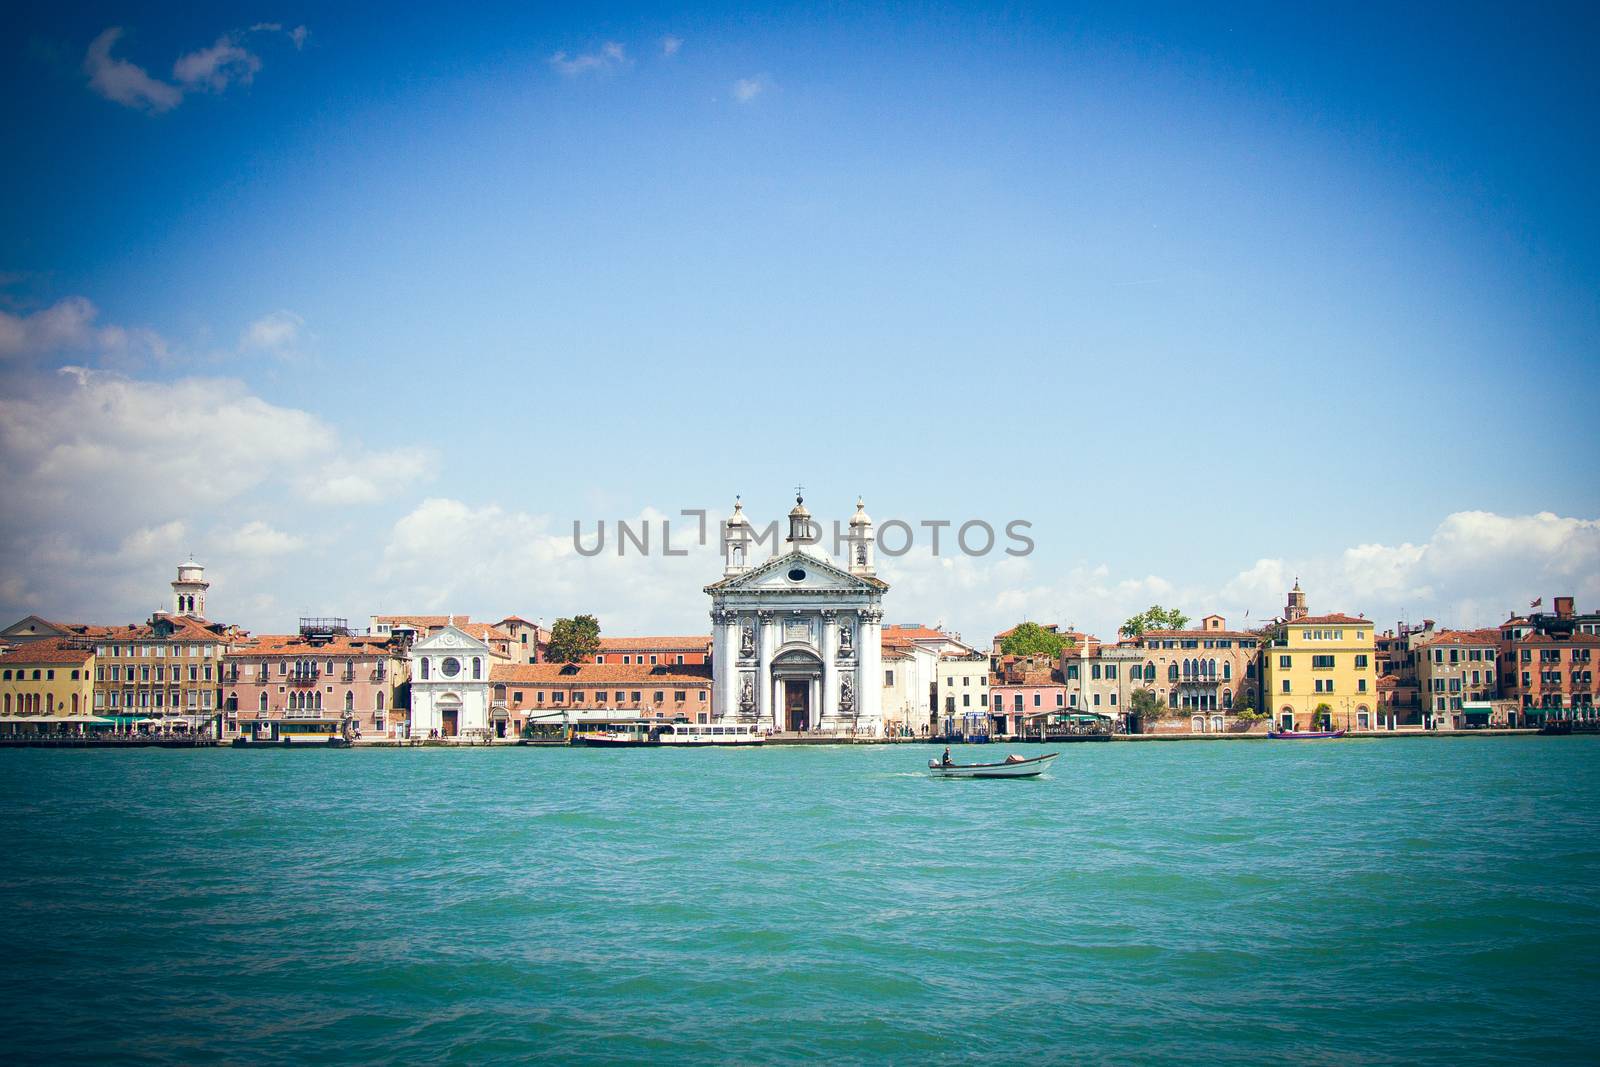 The grand canal in Venice